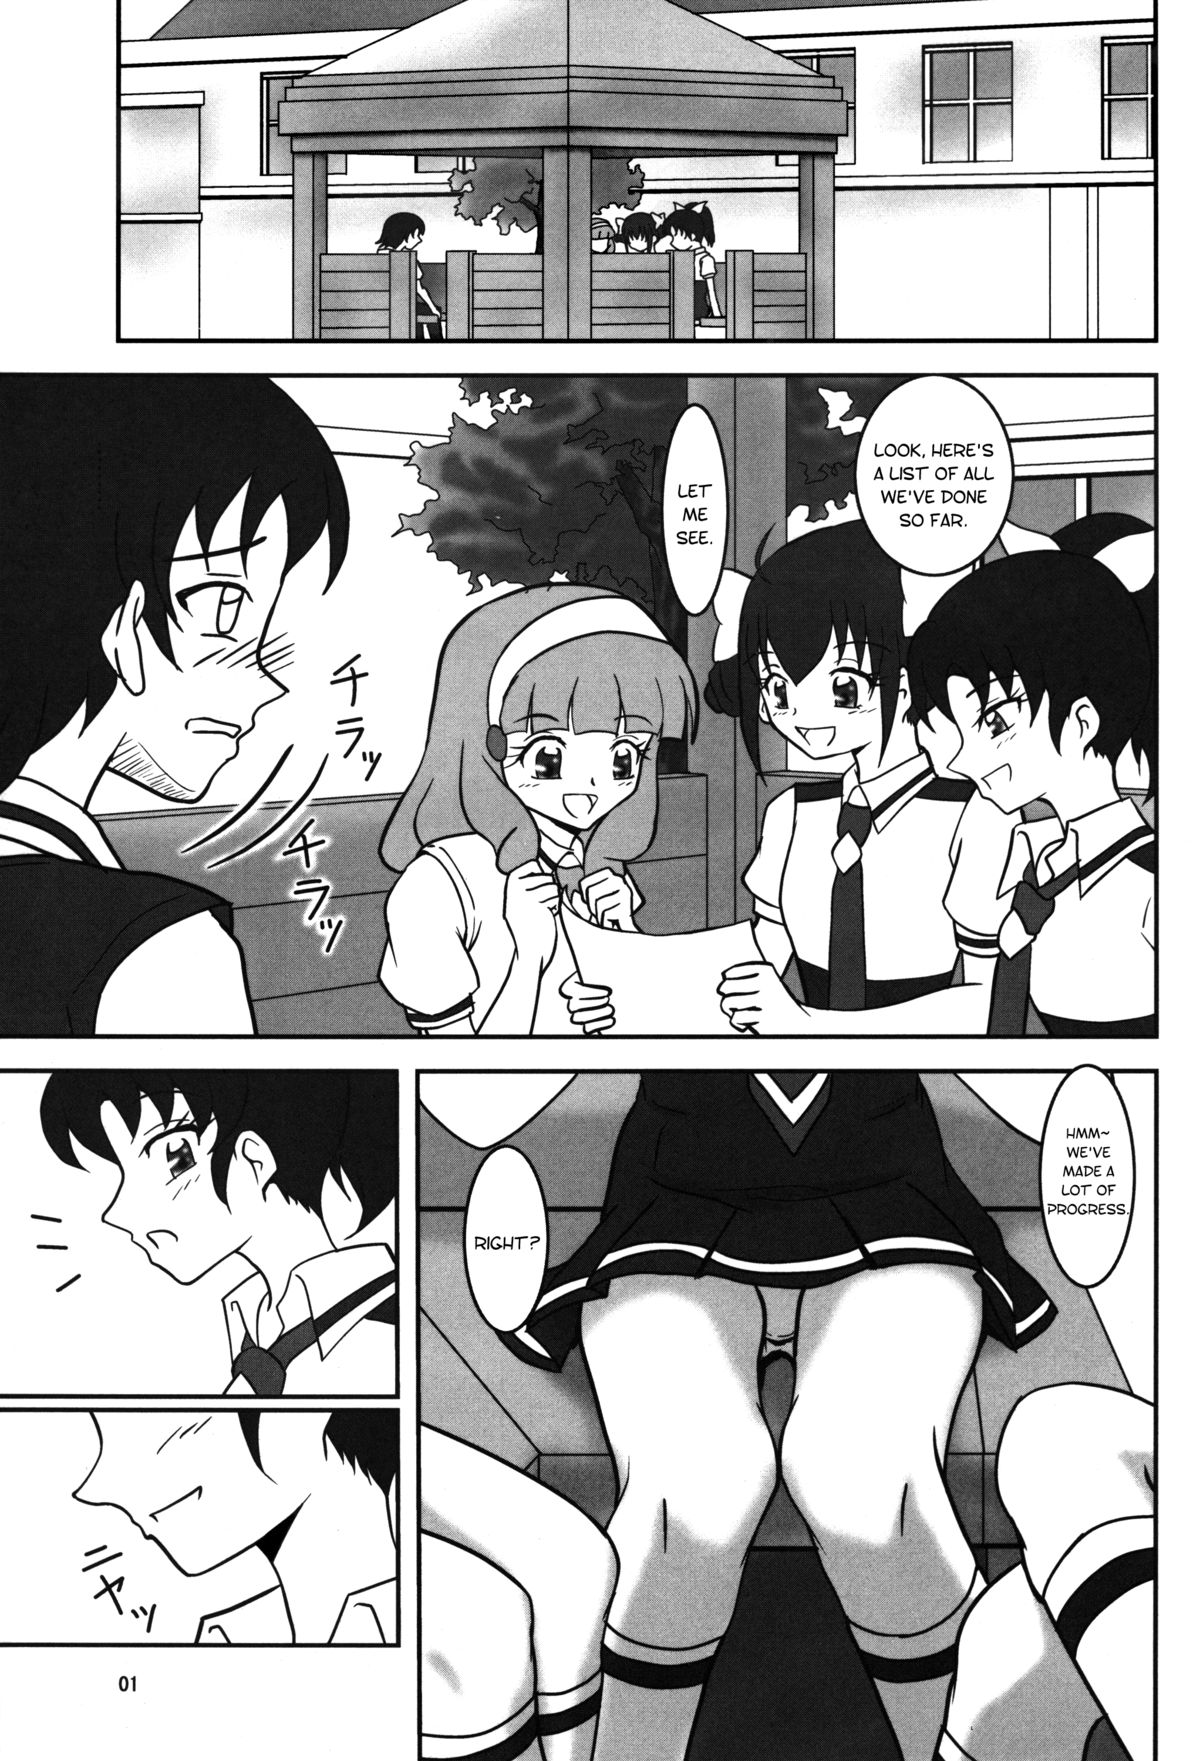 (C82) [AFJ (Ashi_O)] Smell Zuricure | Smell Footycure (Smile Precure!) [English] page 2 full